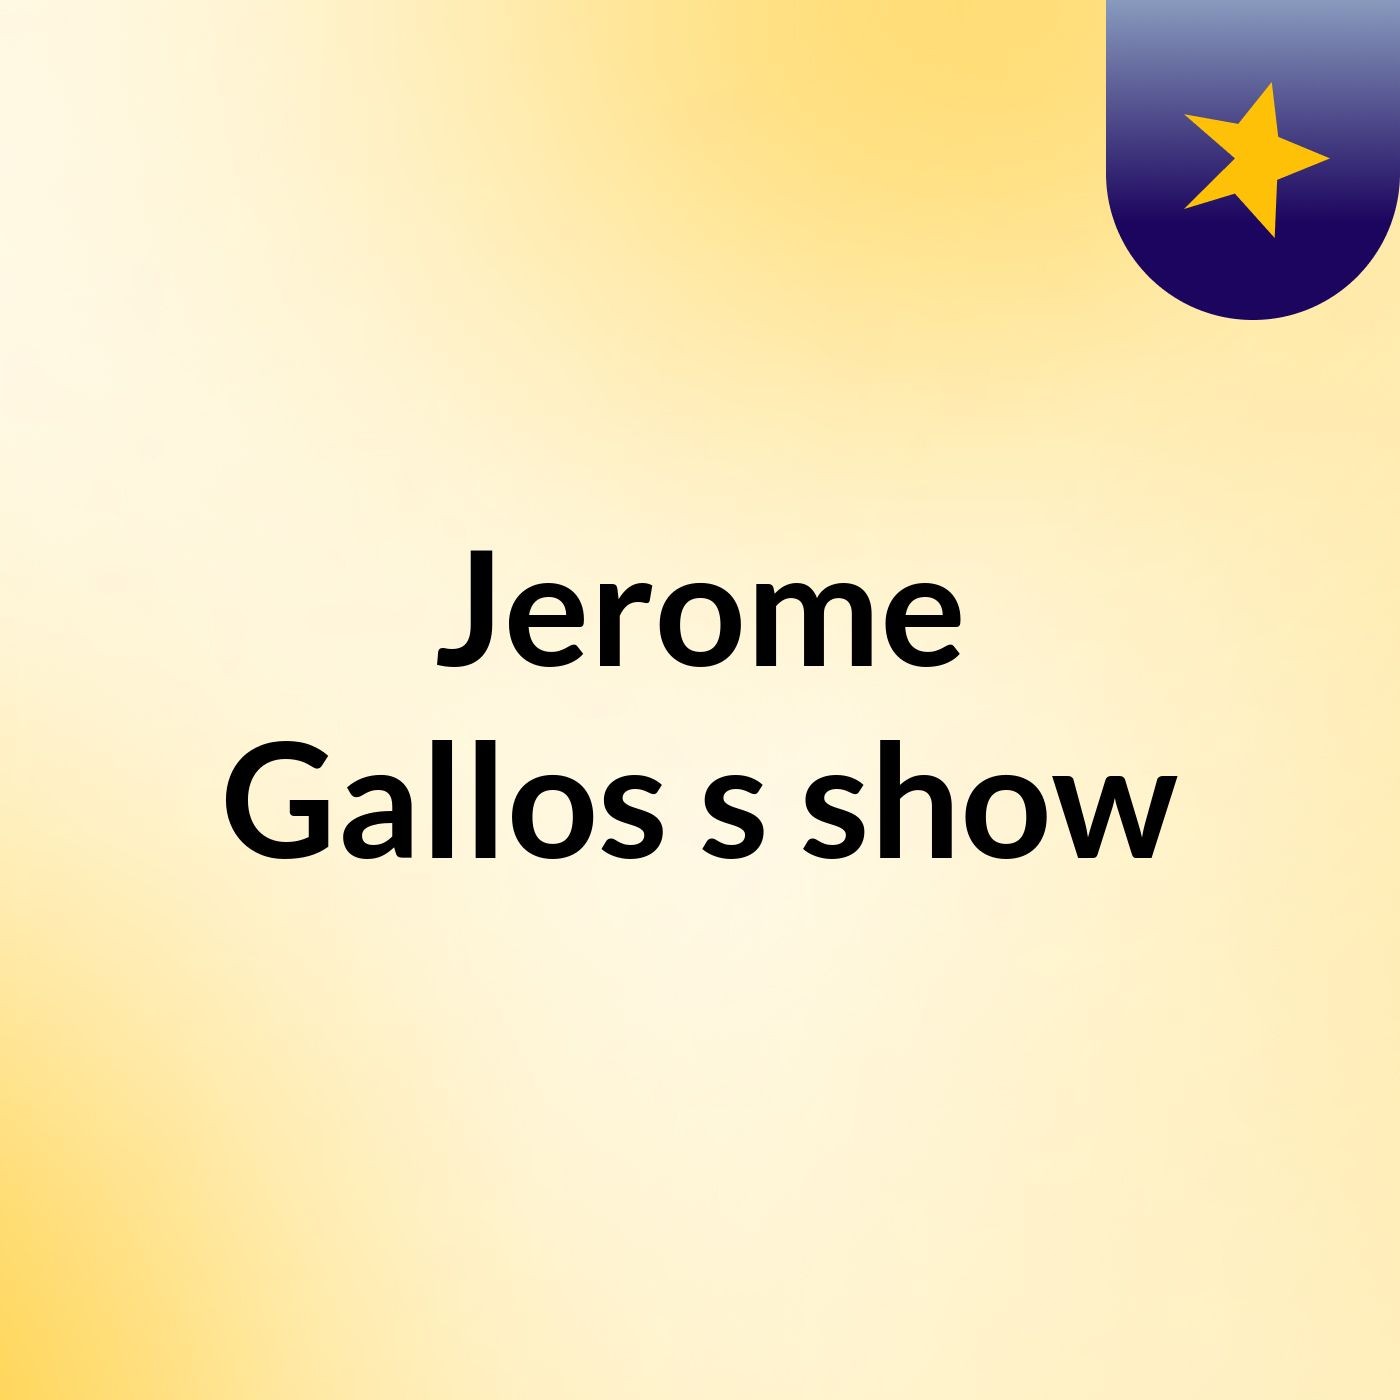 Jerome Gallos's show